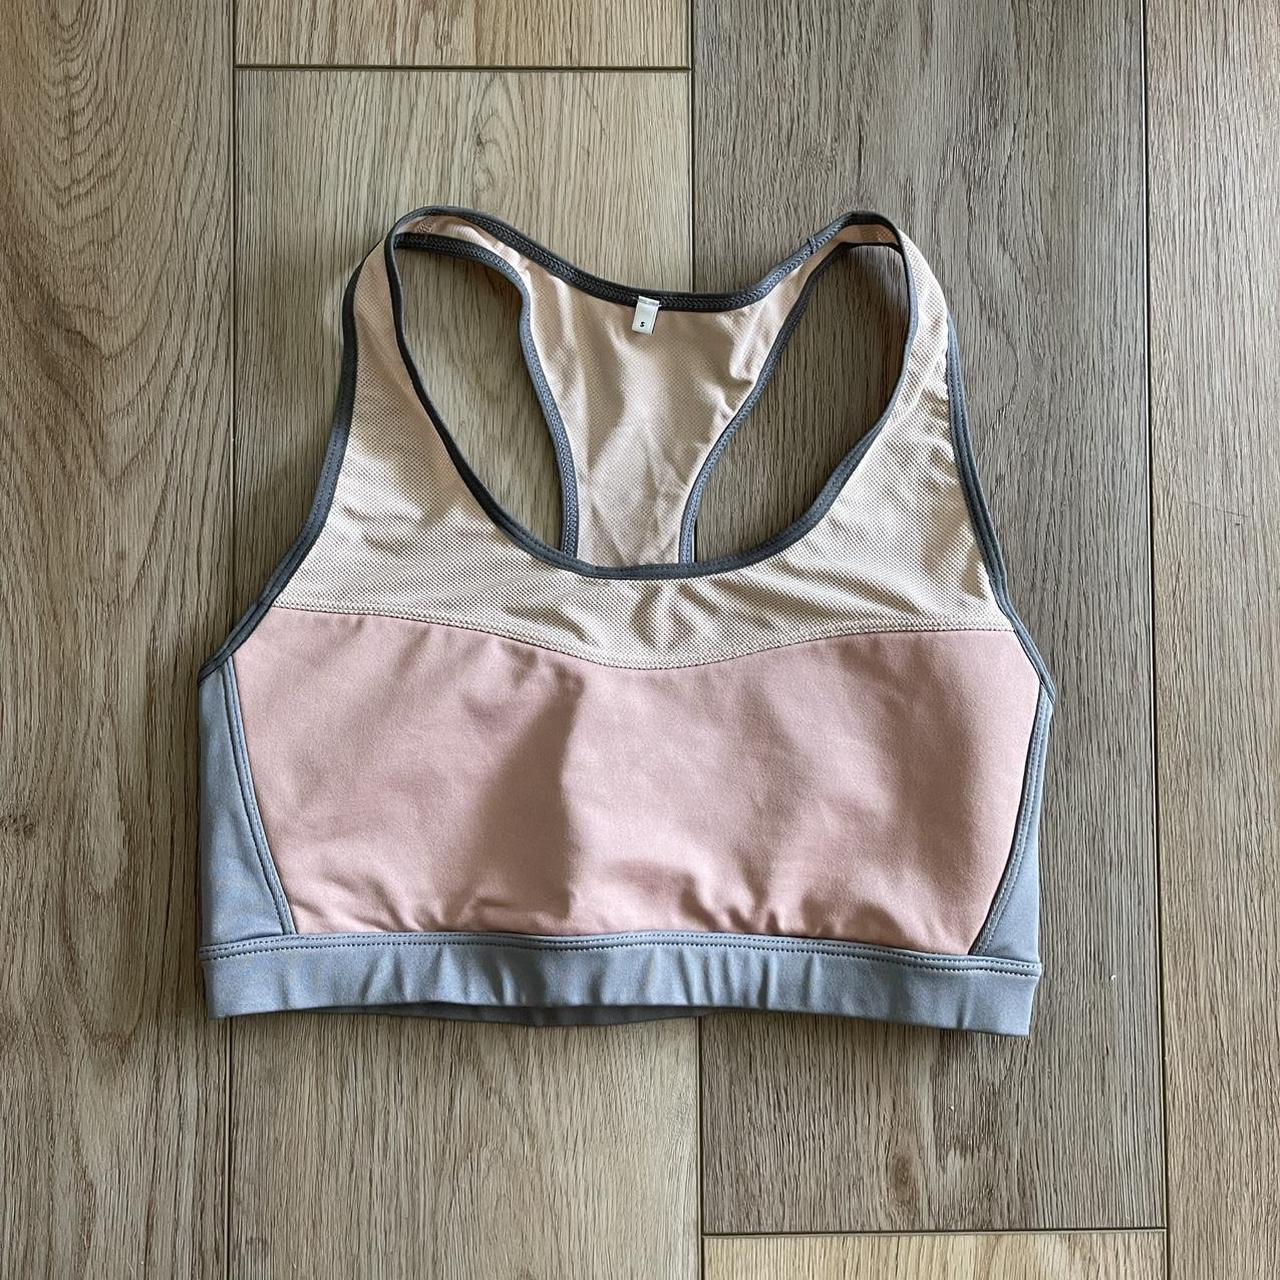 Country Road Women's Pink and Grey Bra